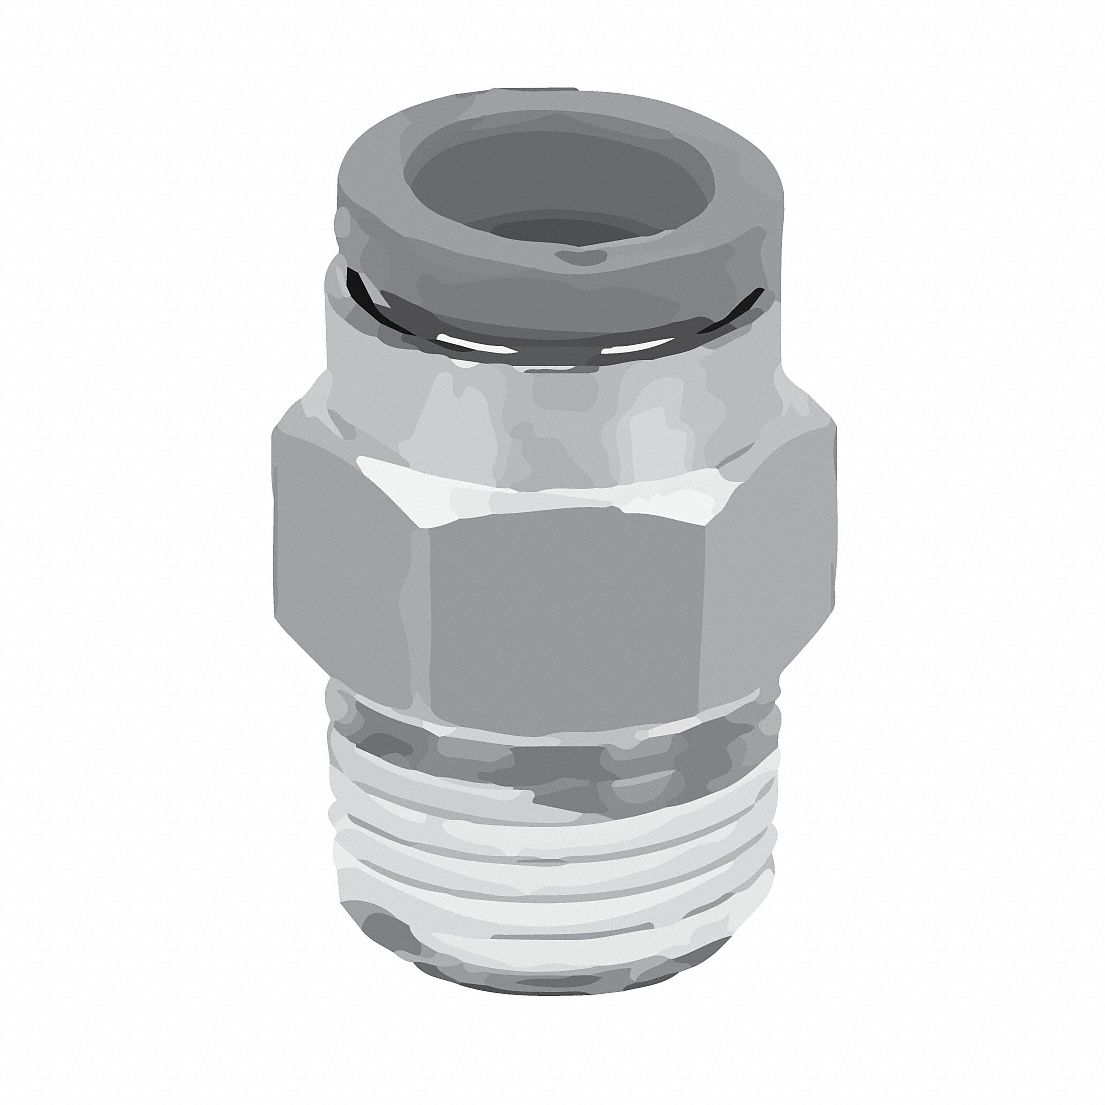 Plastic Straight Union Pipe Tube Fitting Straight Pneumatic Connector Fits for Tube OD: 1/4 8mm 30PCS Push to Connect Tube Fitting 5/16 3/8 10mm 6mm 